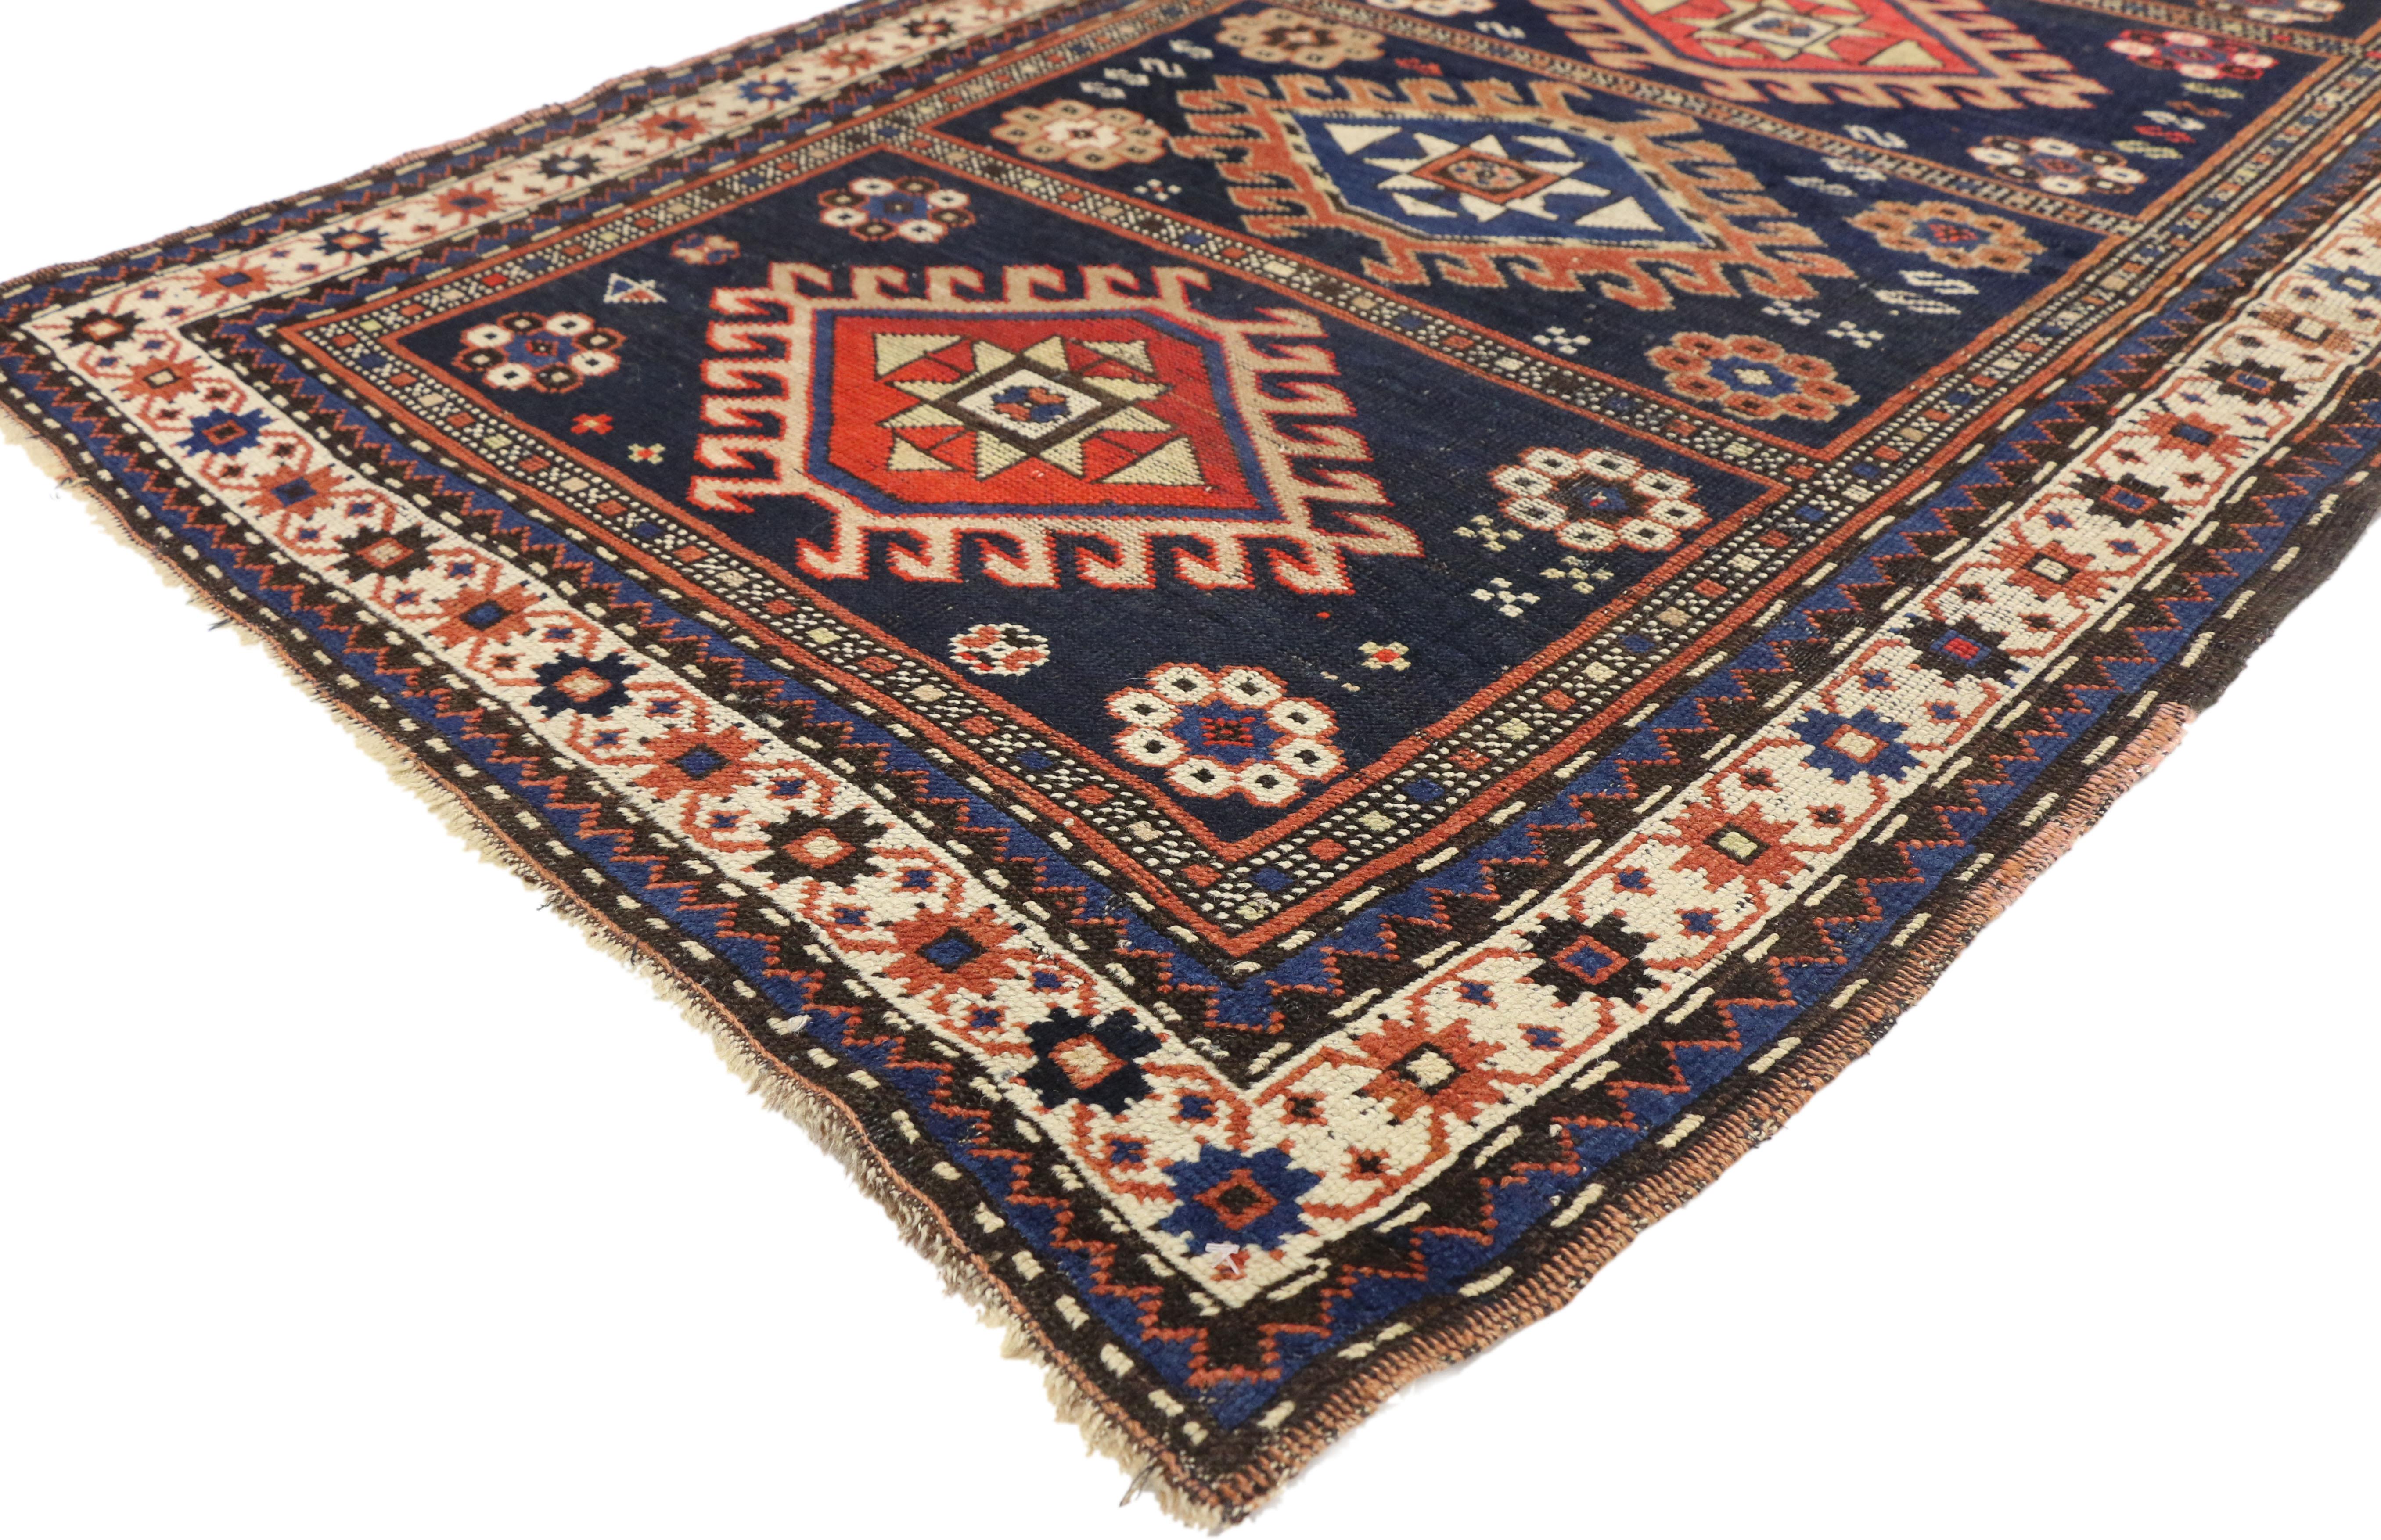 73094, antique Caucasian Kazak tribal rug with compartment design. This hand-knotted wool antique Caucasian Kazak tribal rug features a compartment design composed of four latch hook medallions. The compartments are surrounded by an s-hooks,